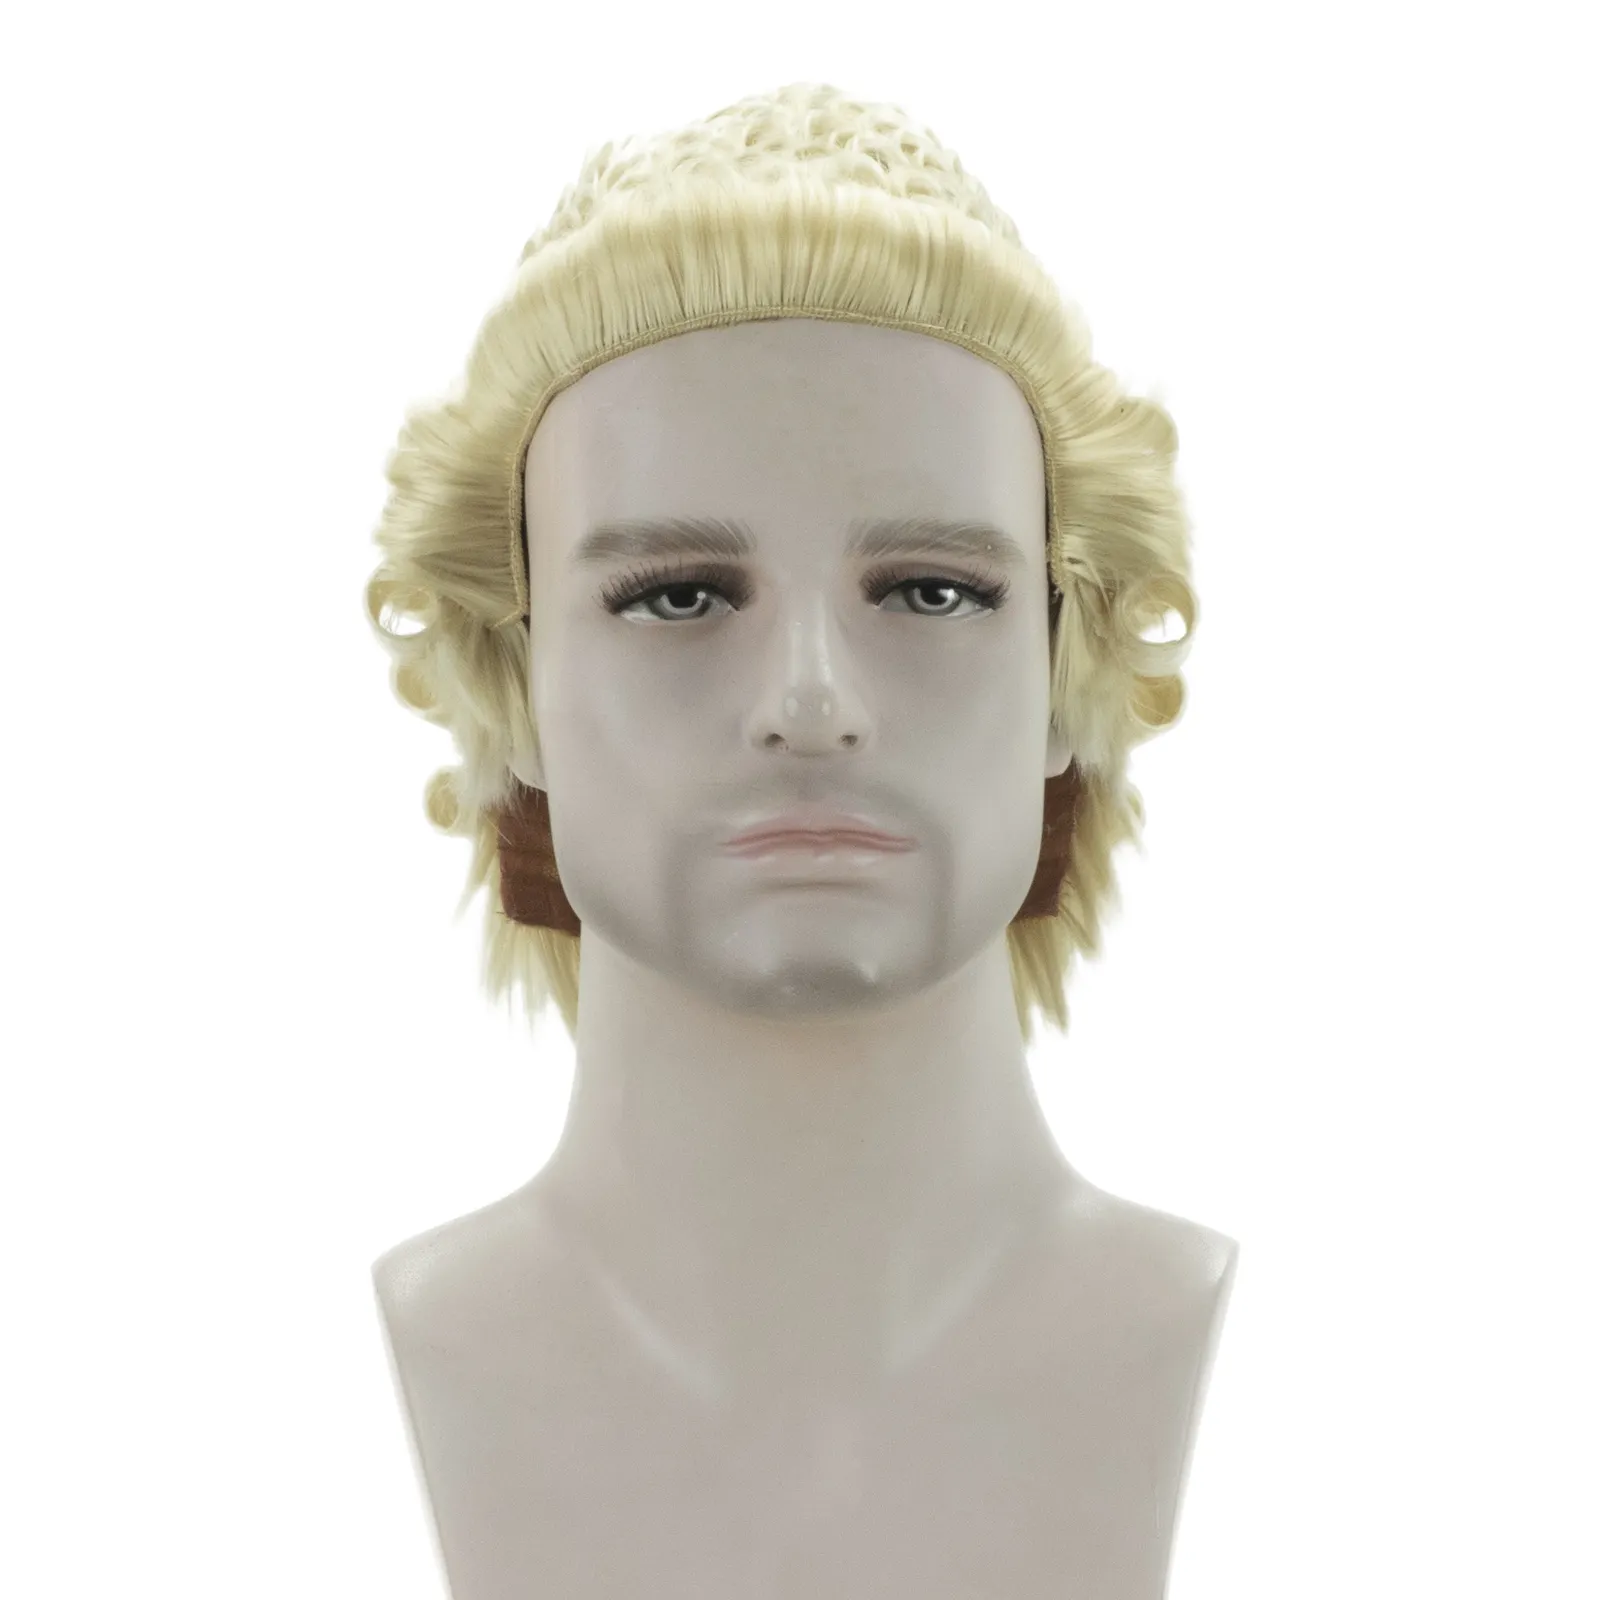 Aishili手作りバリスターウィッグ人工毛Magistrate's Mullet Lawyer Judge Wig for Formal Use in Court and Costume